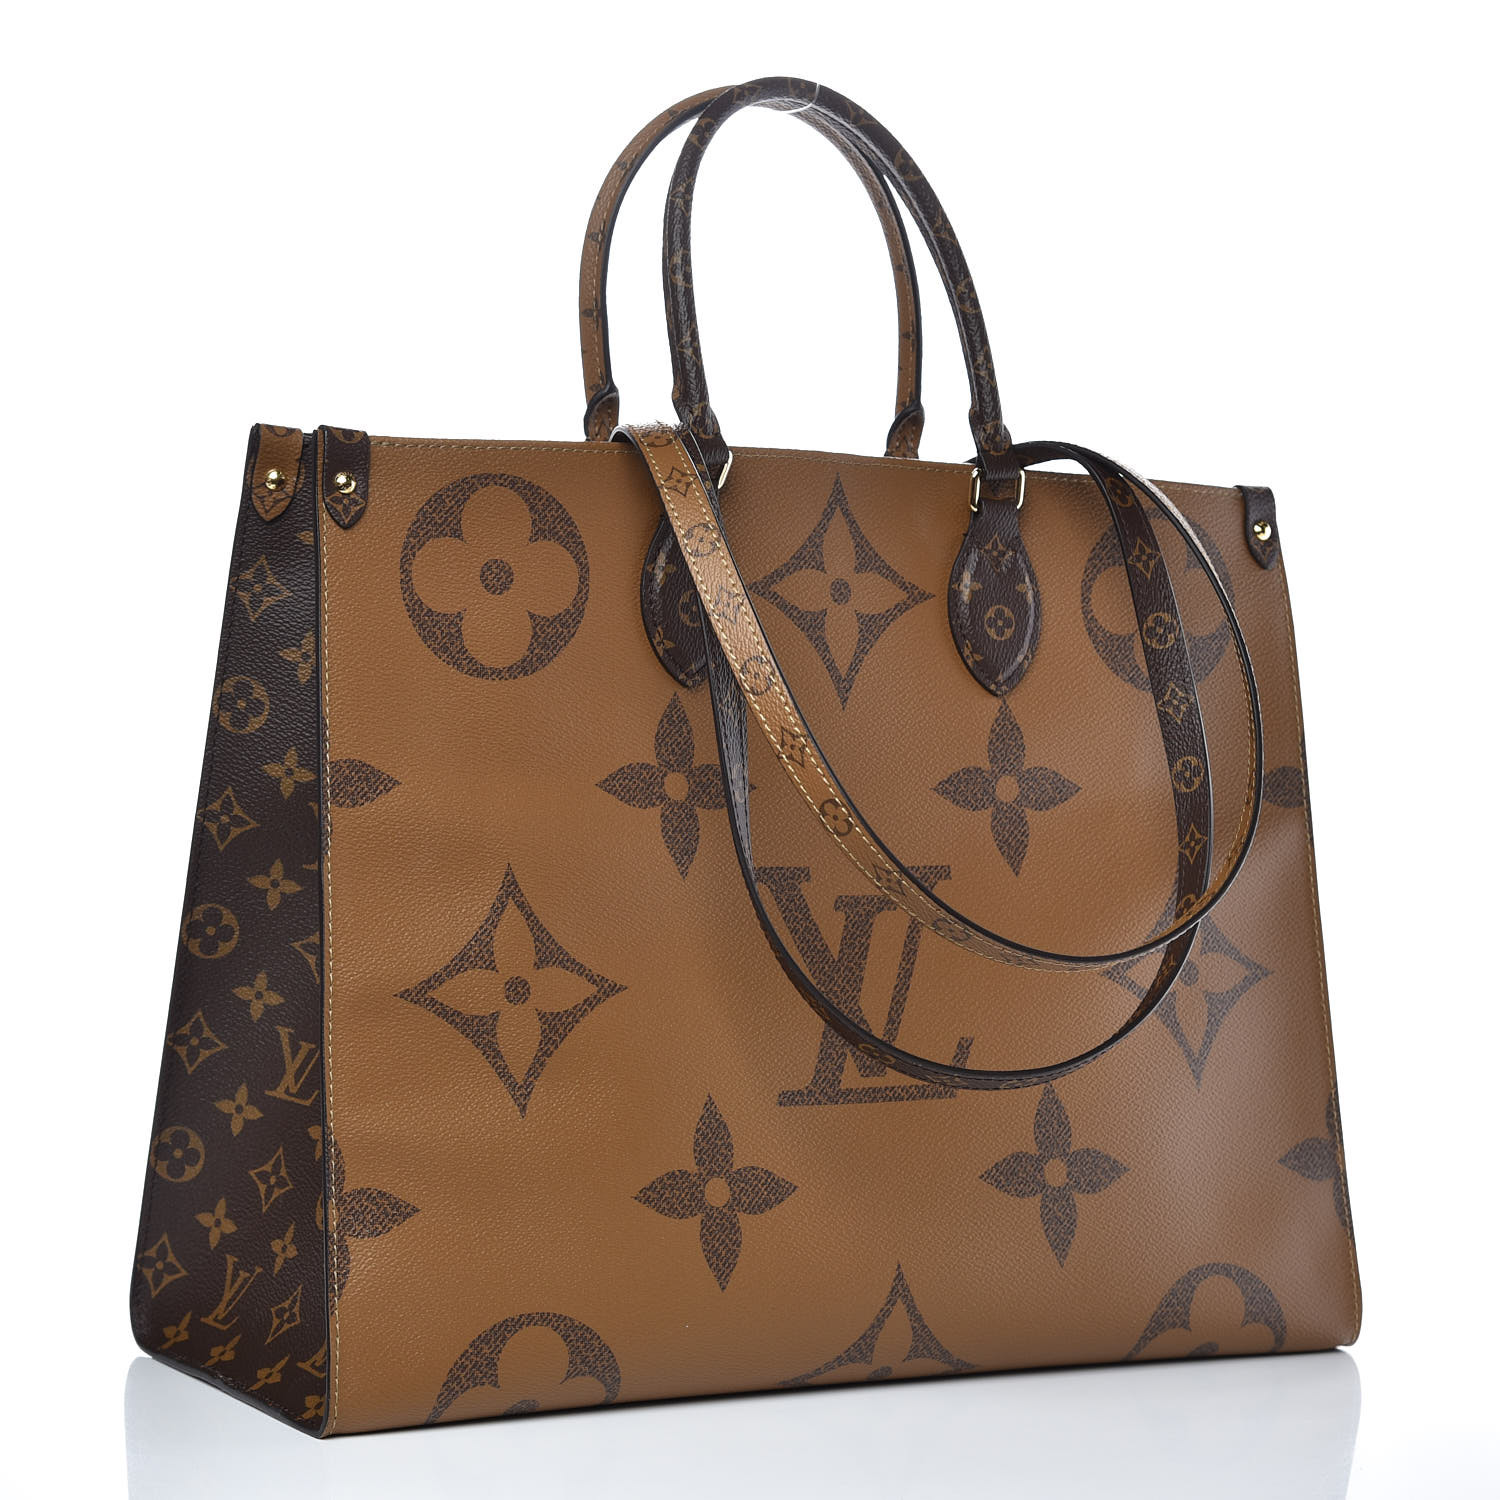 LOUIS VUITTON ONTHEGO GM REVERSE MONOGRAM TOTE AND LV ONTHEGO MM TOTE  EMPREINTE LEATHER COMPARISON 